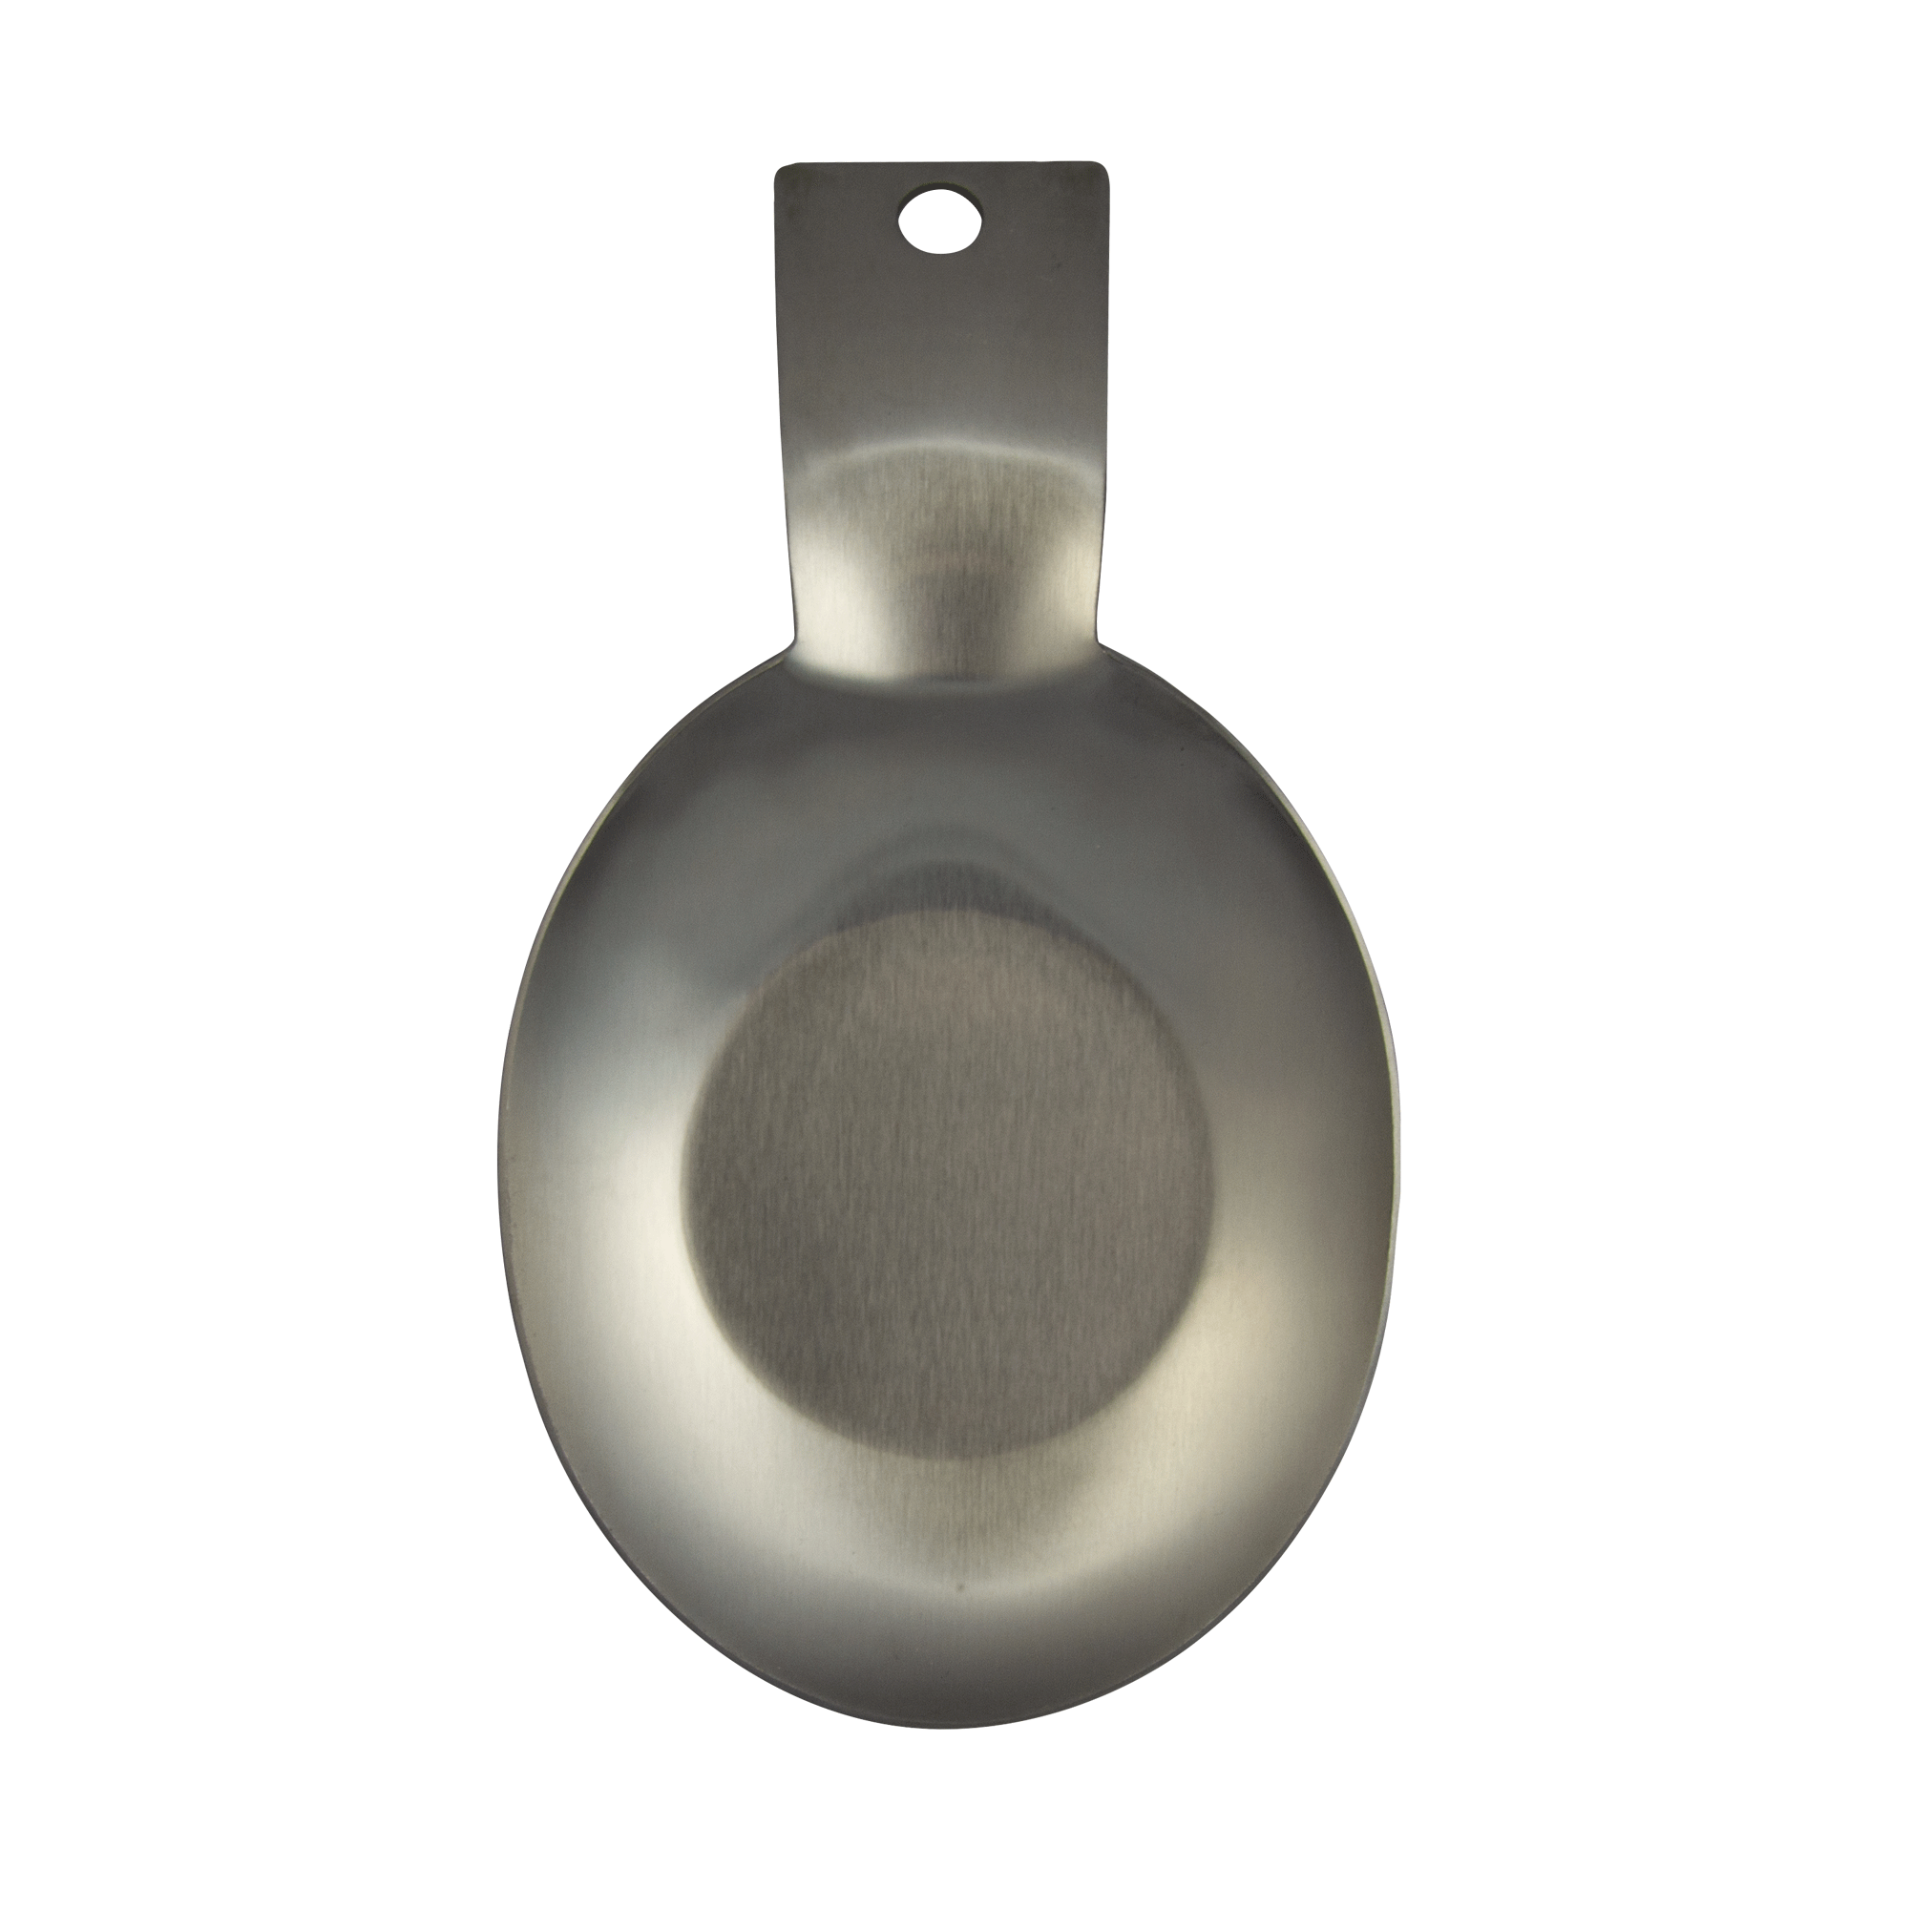 Stainless Steel Spoon Rest